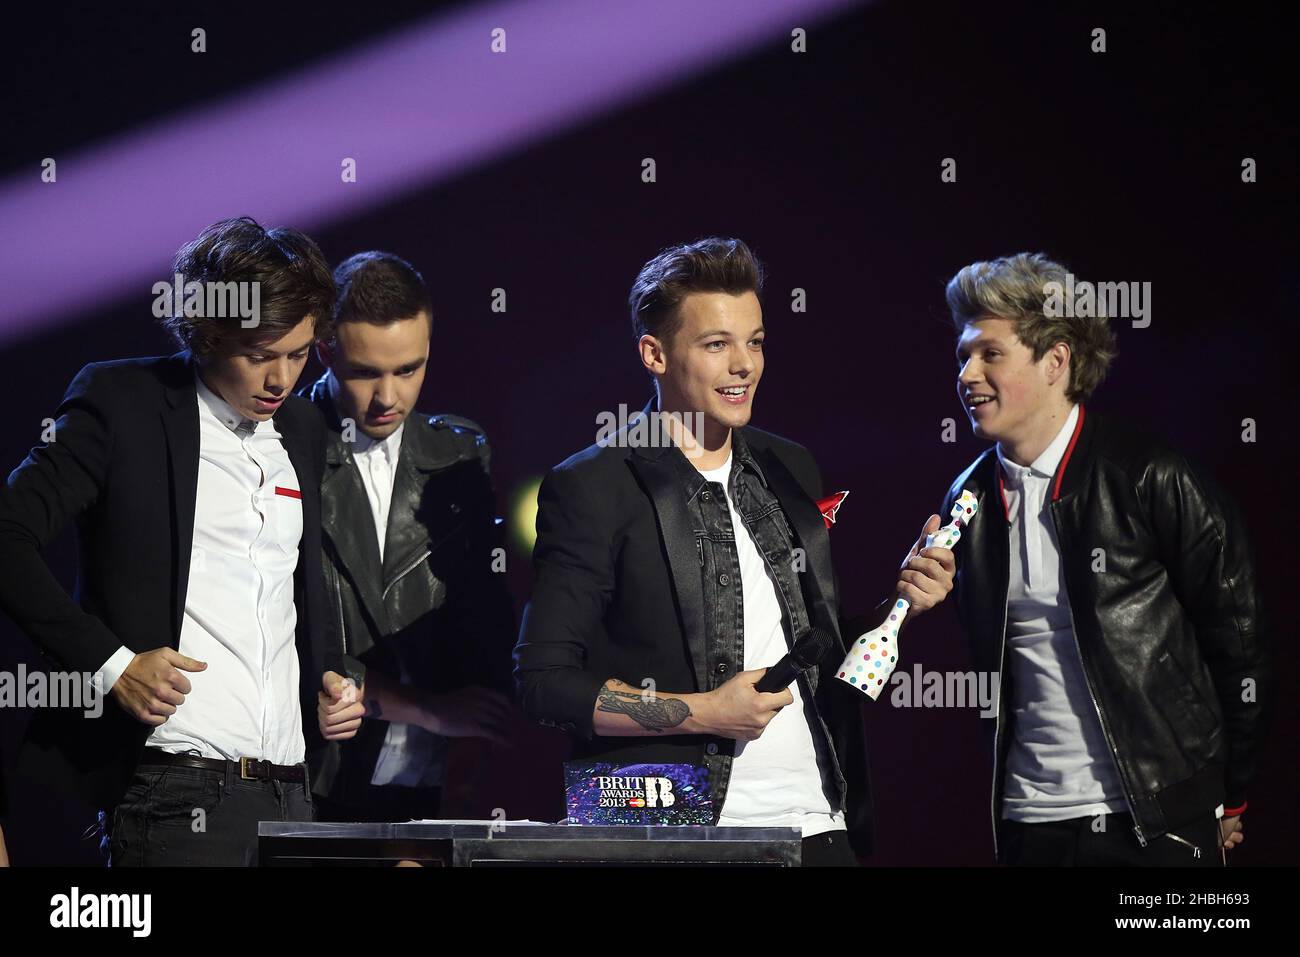 Niall Horan, Harry Styles, Louis Tomlinson and Liam Payne of One Direction  049 at the iHeartRadio Jingle Ball KIIS FM at the Staples Center in Los  Angeles. December 4, 2015.One Direction 049